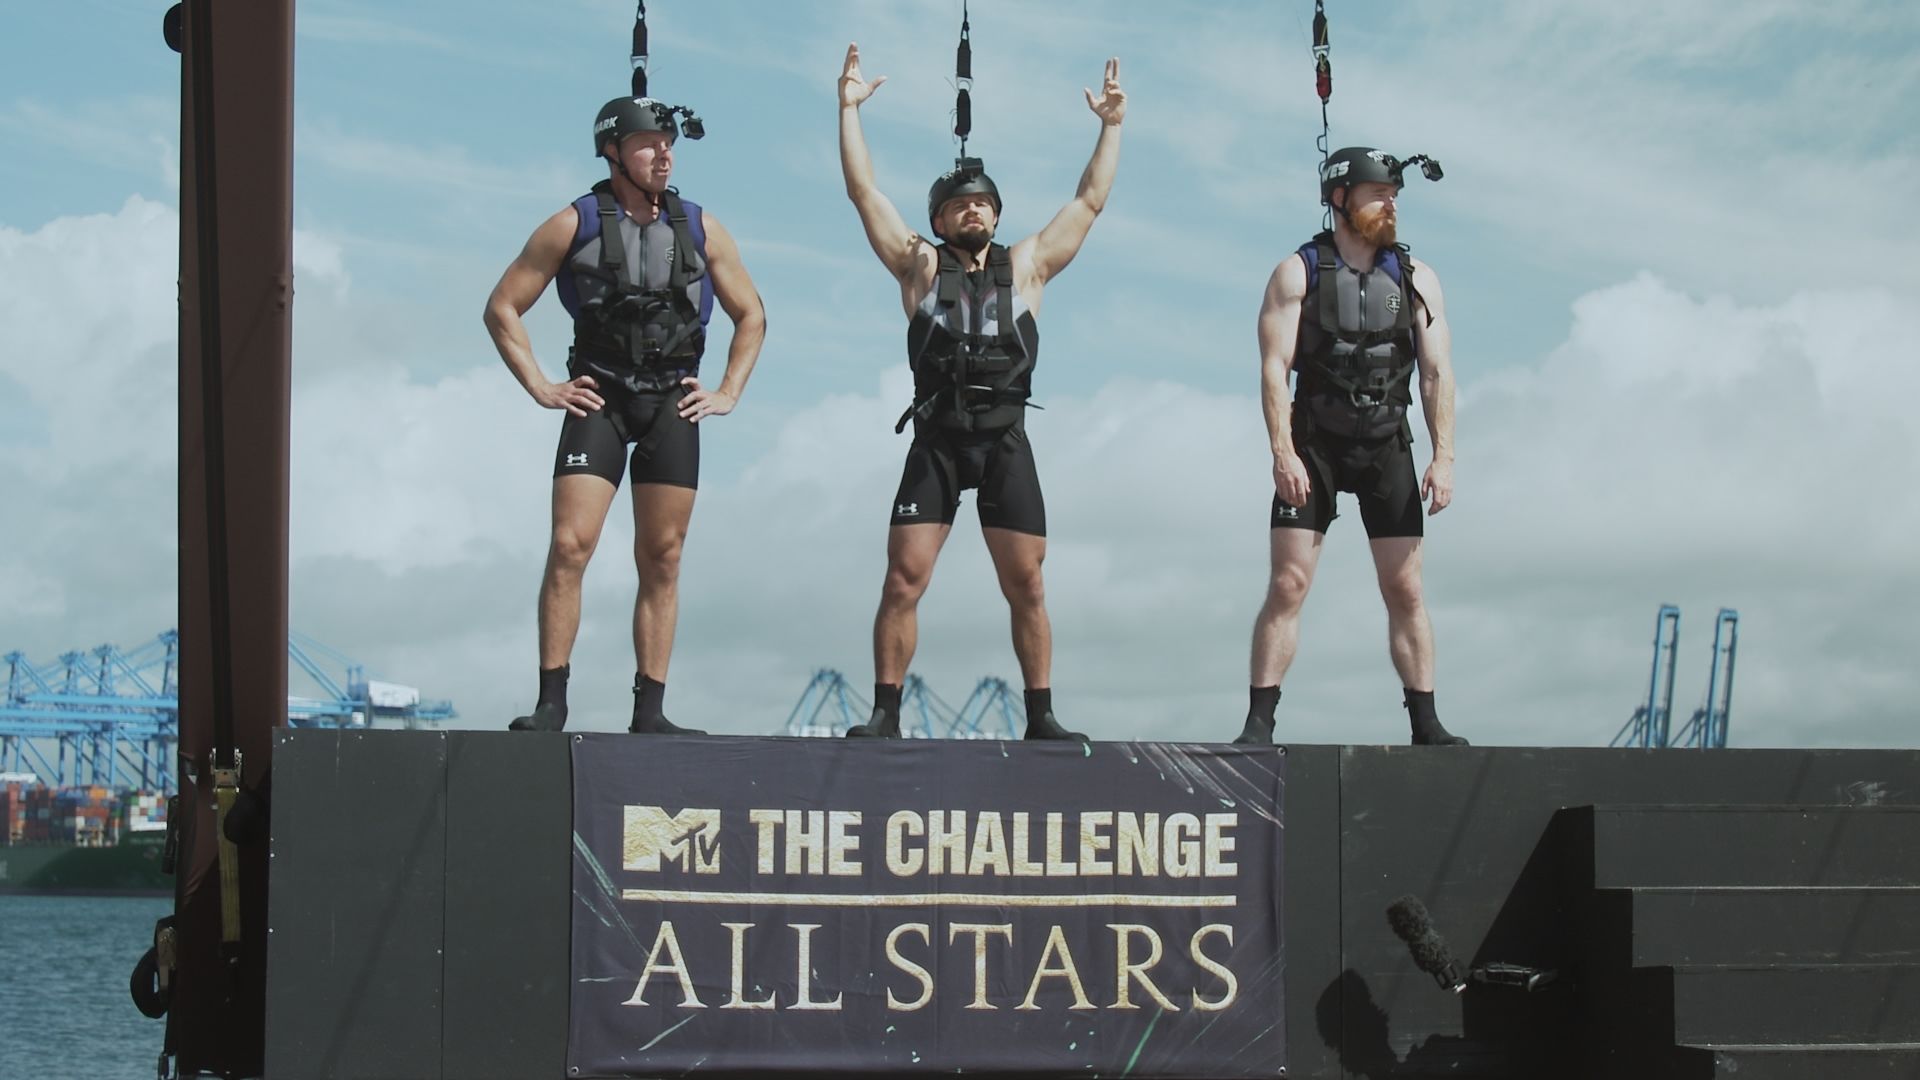 The Challenge: All Stars background